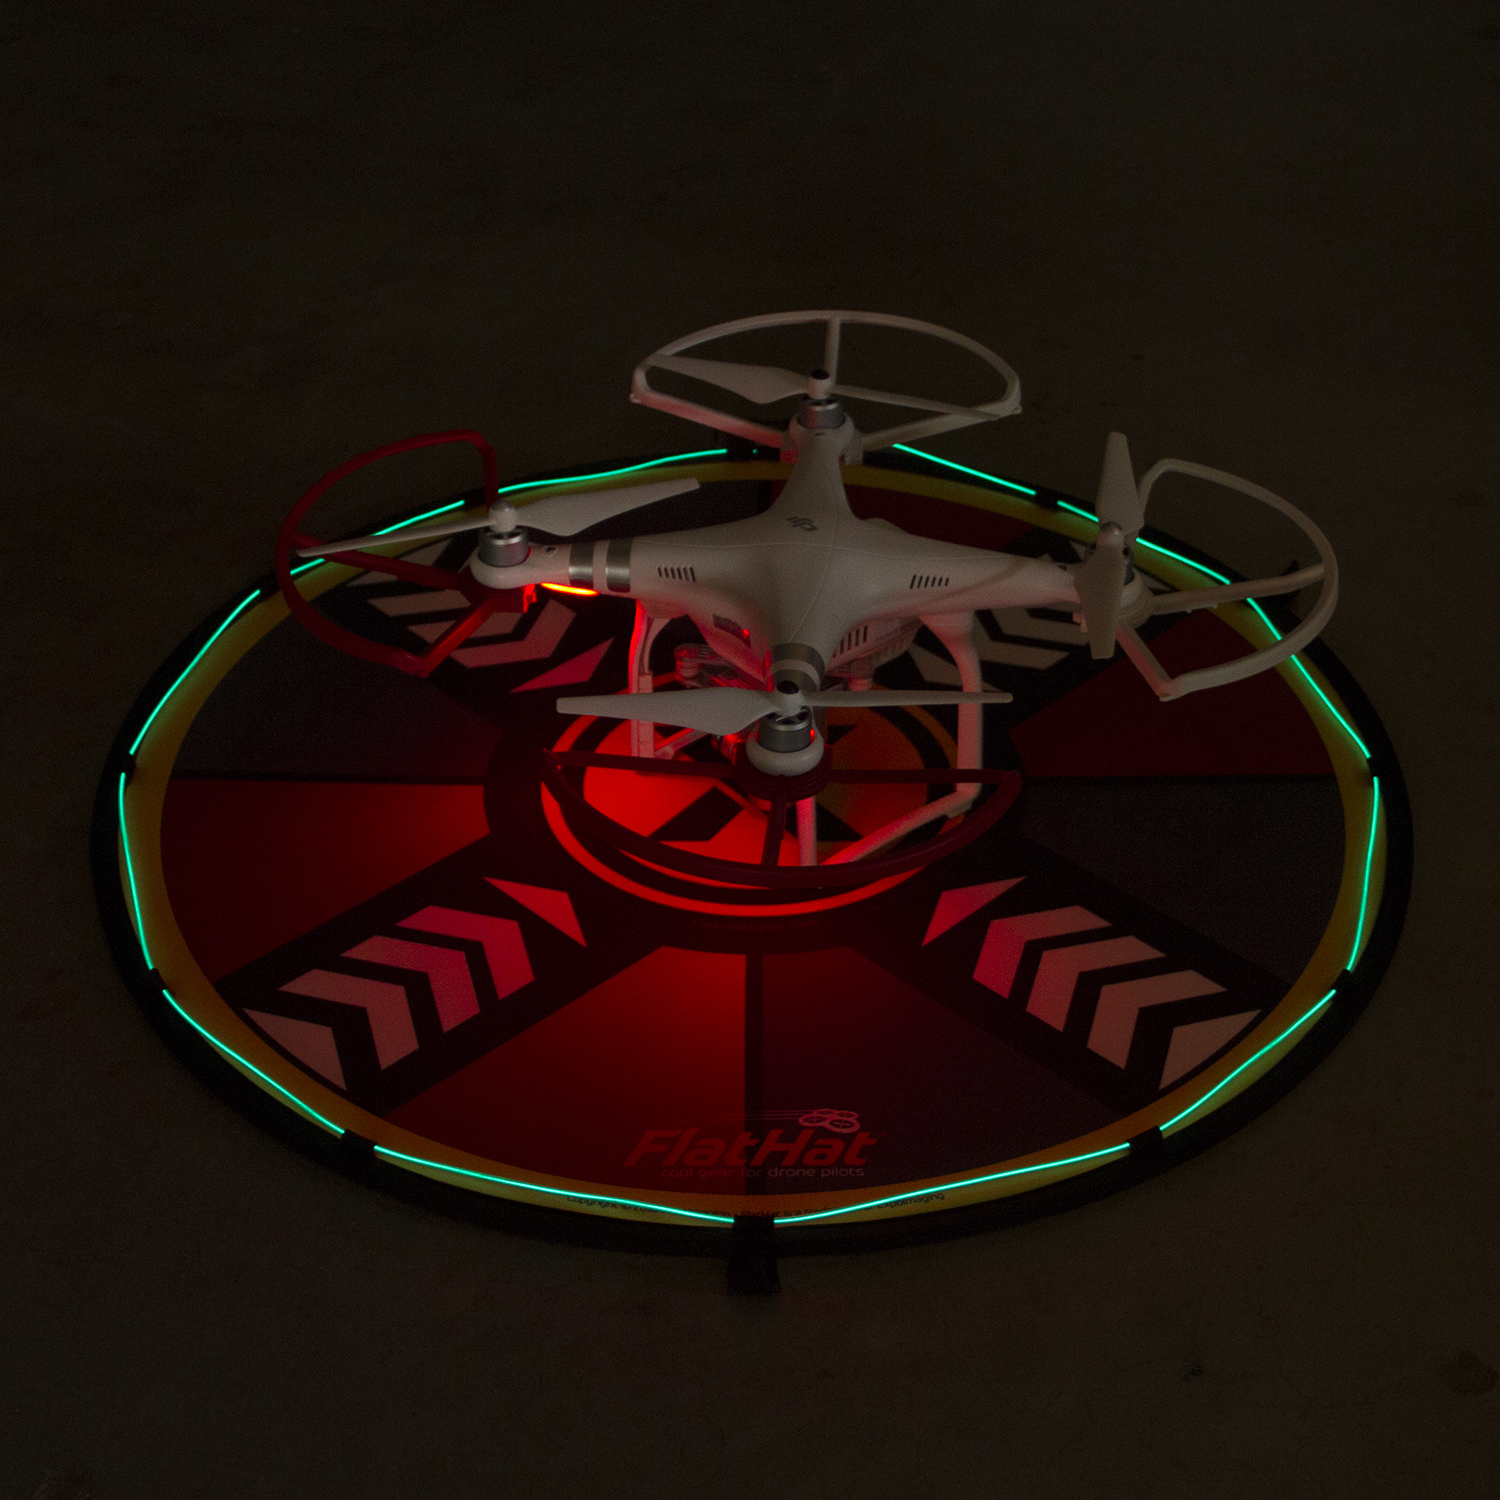 32" FlatHat Collapsible Drone Pad with LIghting Kit